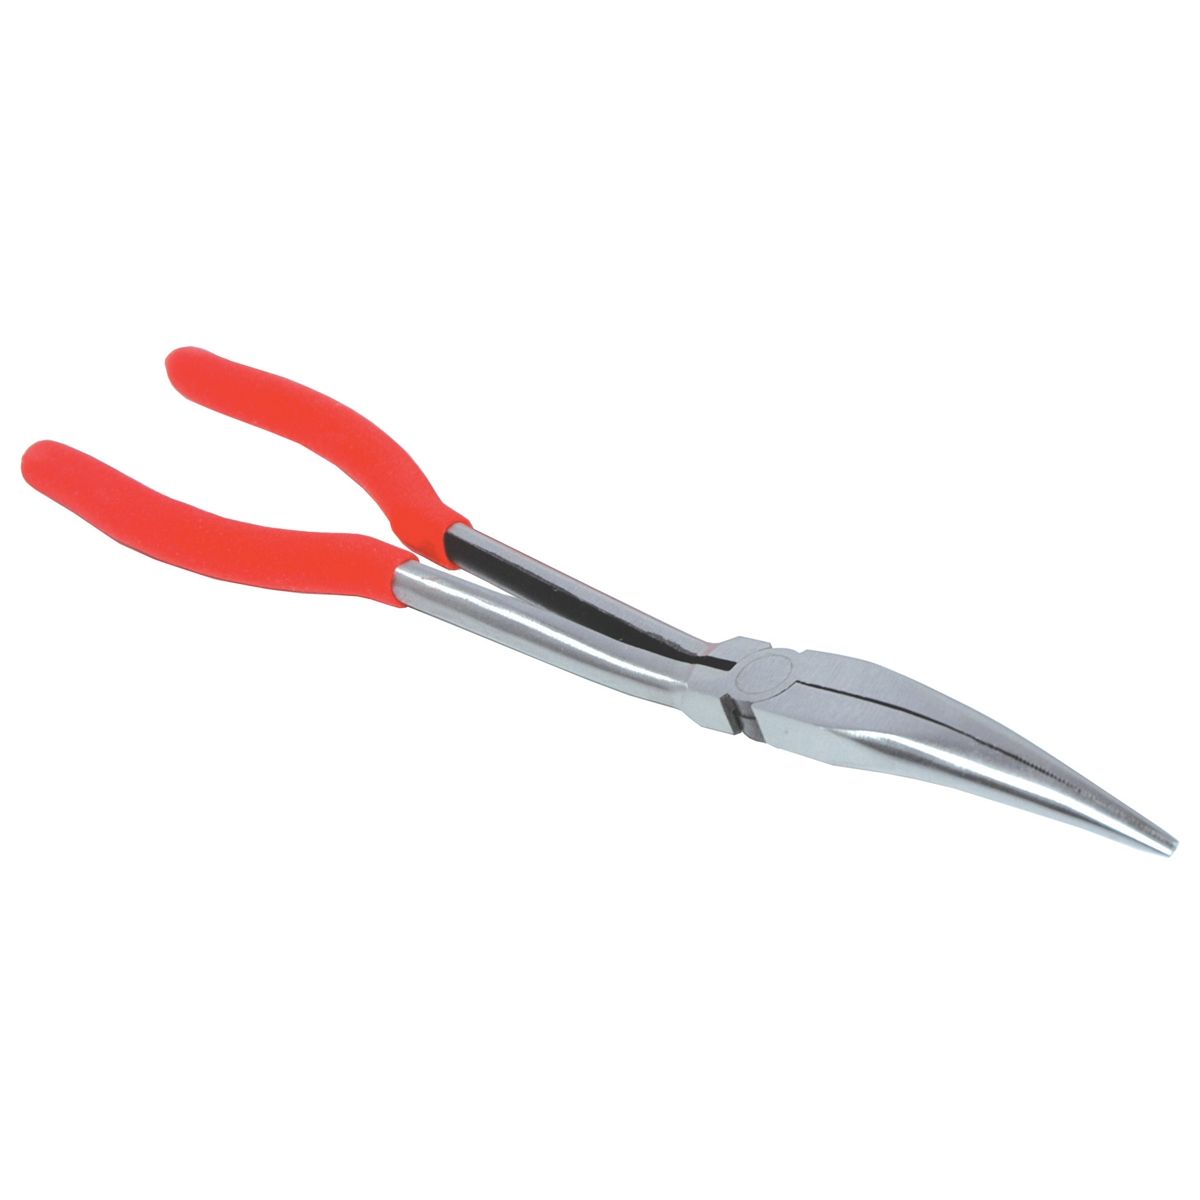 Sunex Pliers Needle Nose 11 Curved